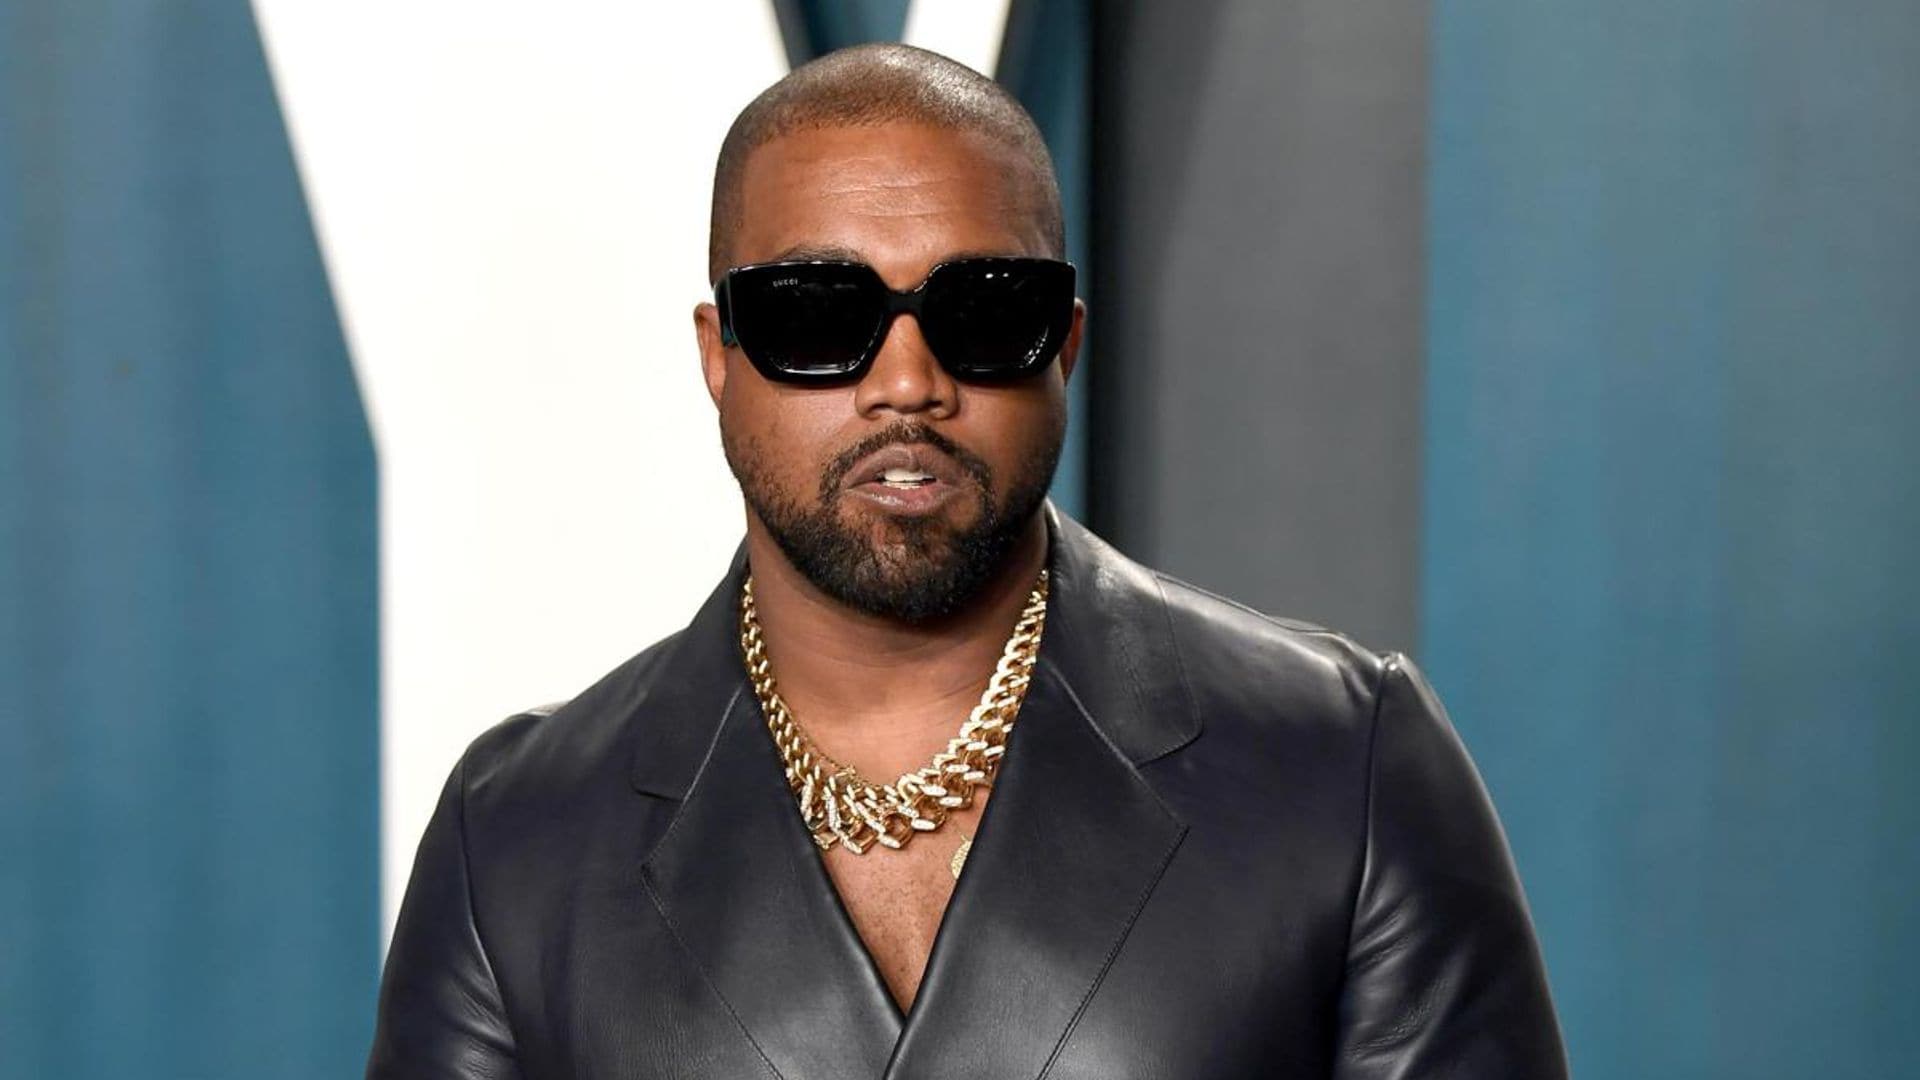 Kanye West wants to have final cut of the Netflix documentary chronicling his career